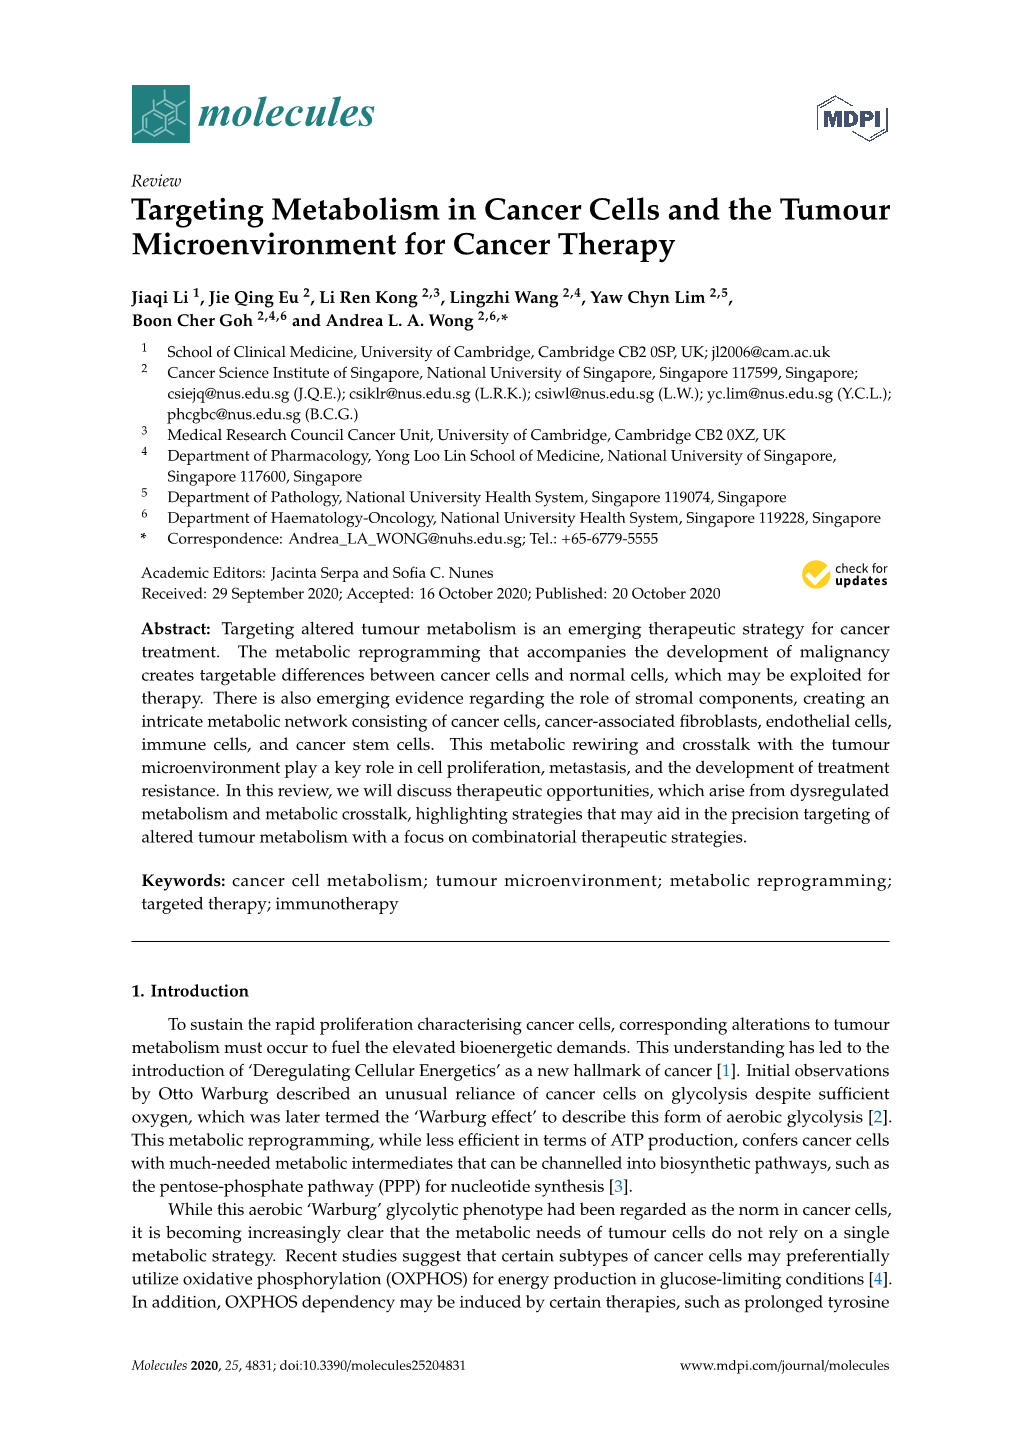 Targeting Metabolism in Cancer Cells and the Tumour Microenvironment for Cancer Therapy